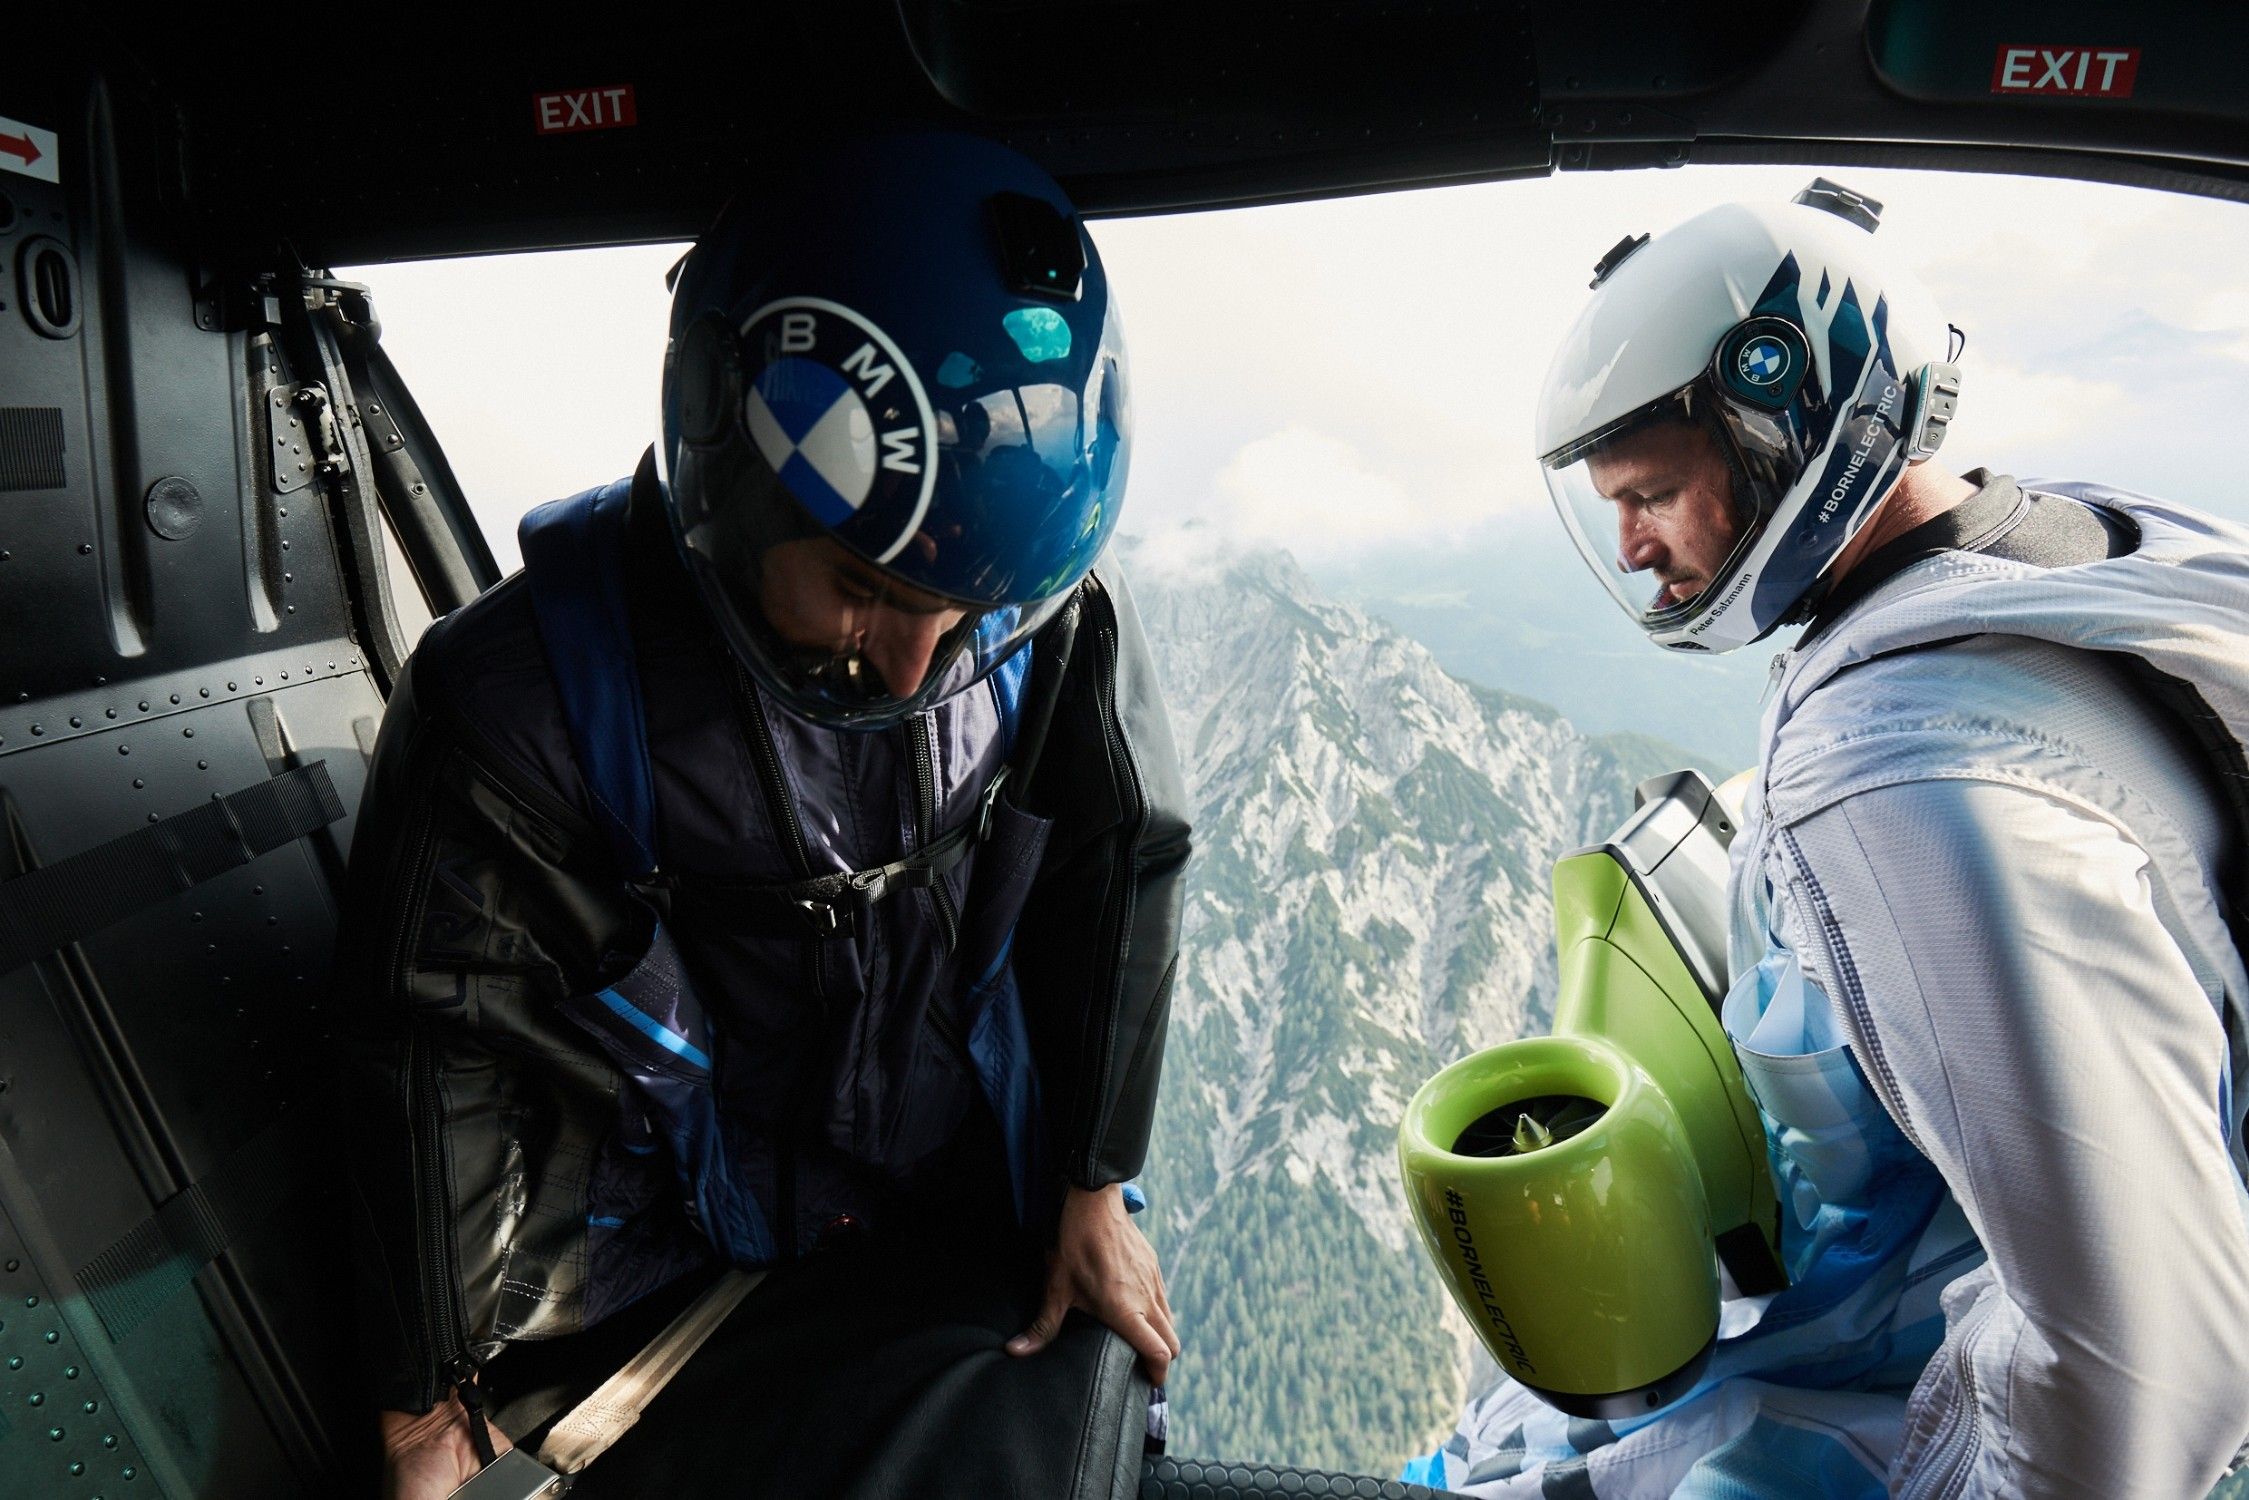 Preparing to jump with the BMW Wingsuit